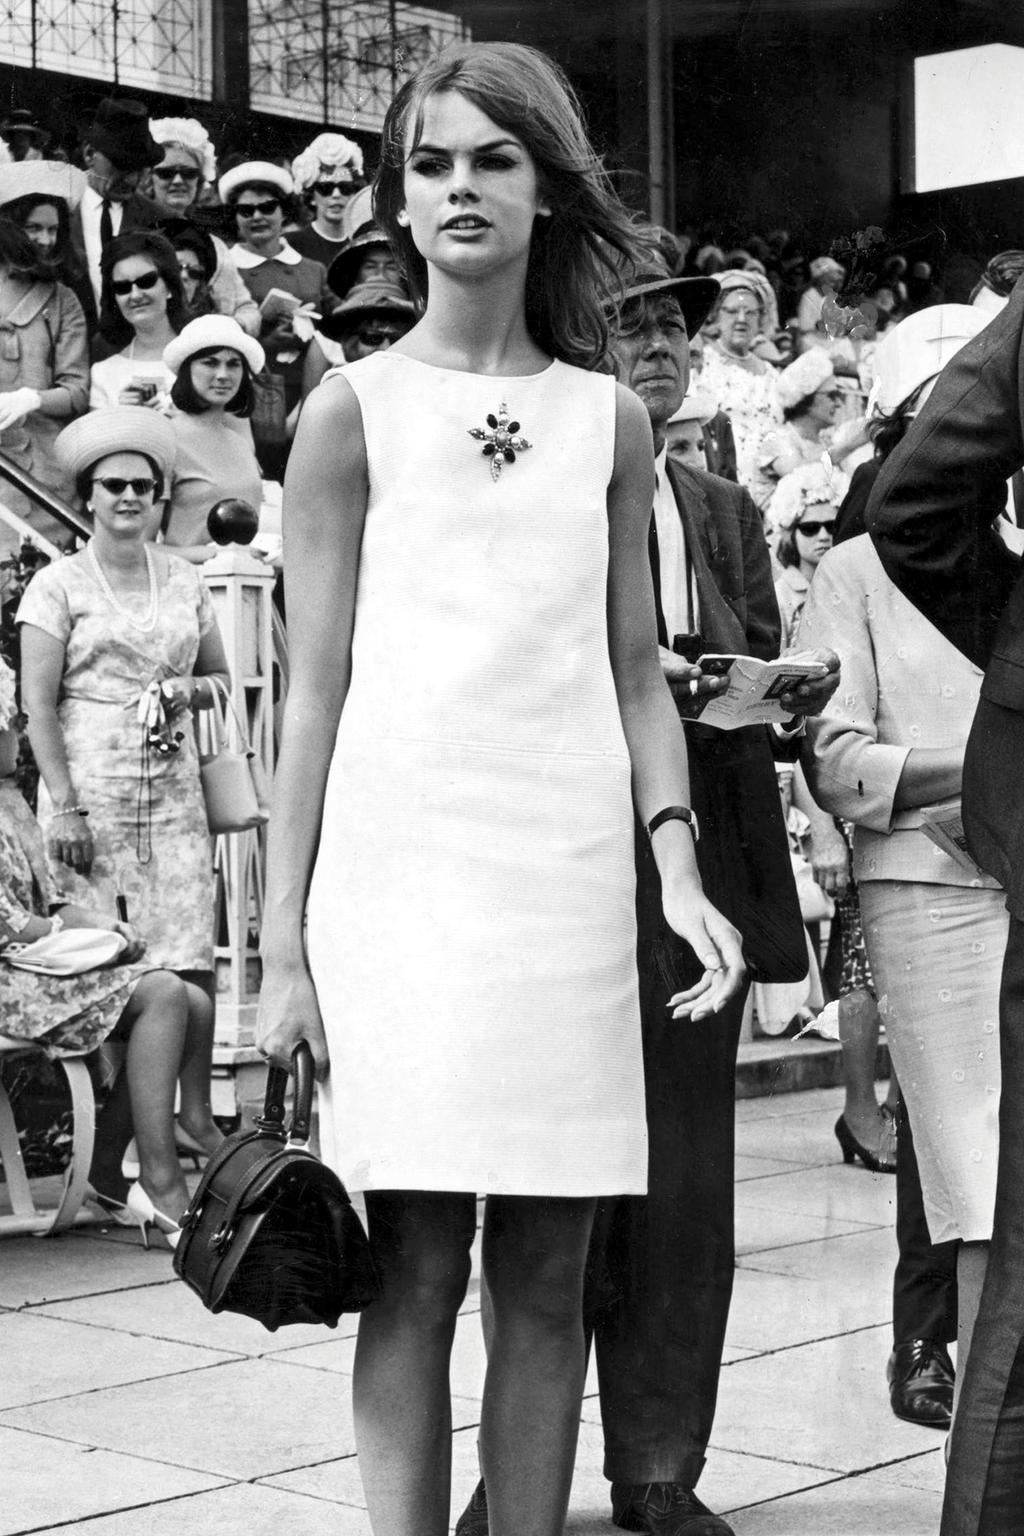 Black and white photograph of Jean Shrimpton in a white mini dress at a race.